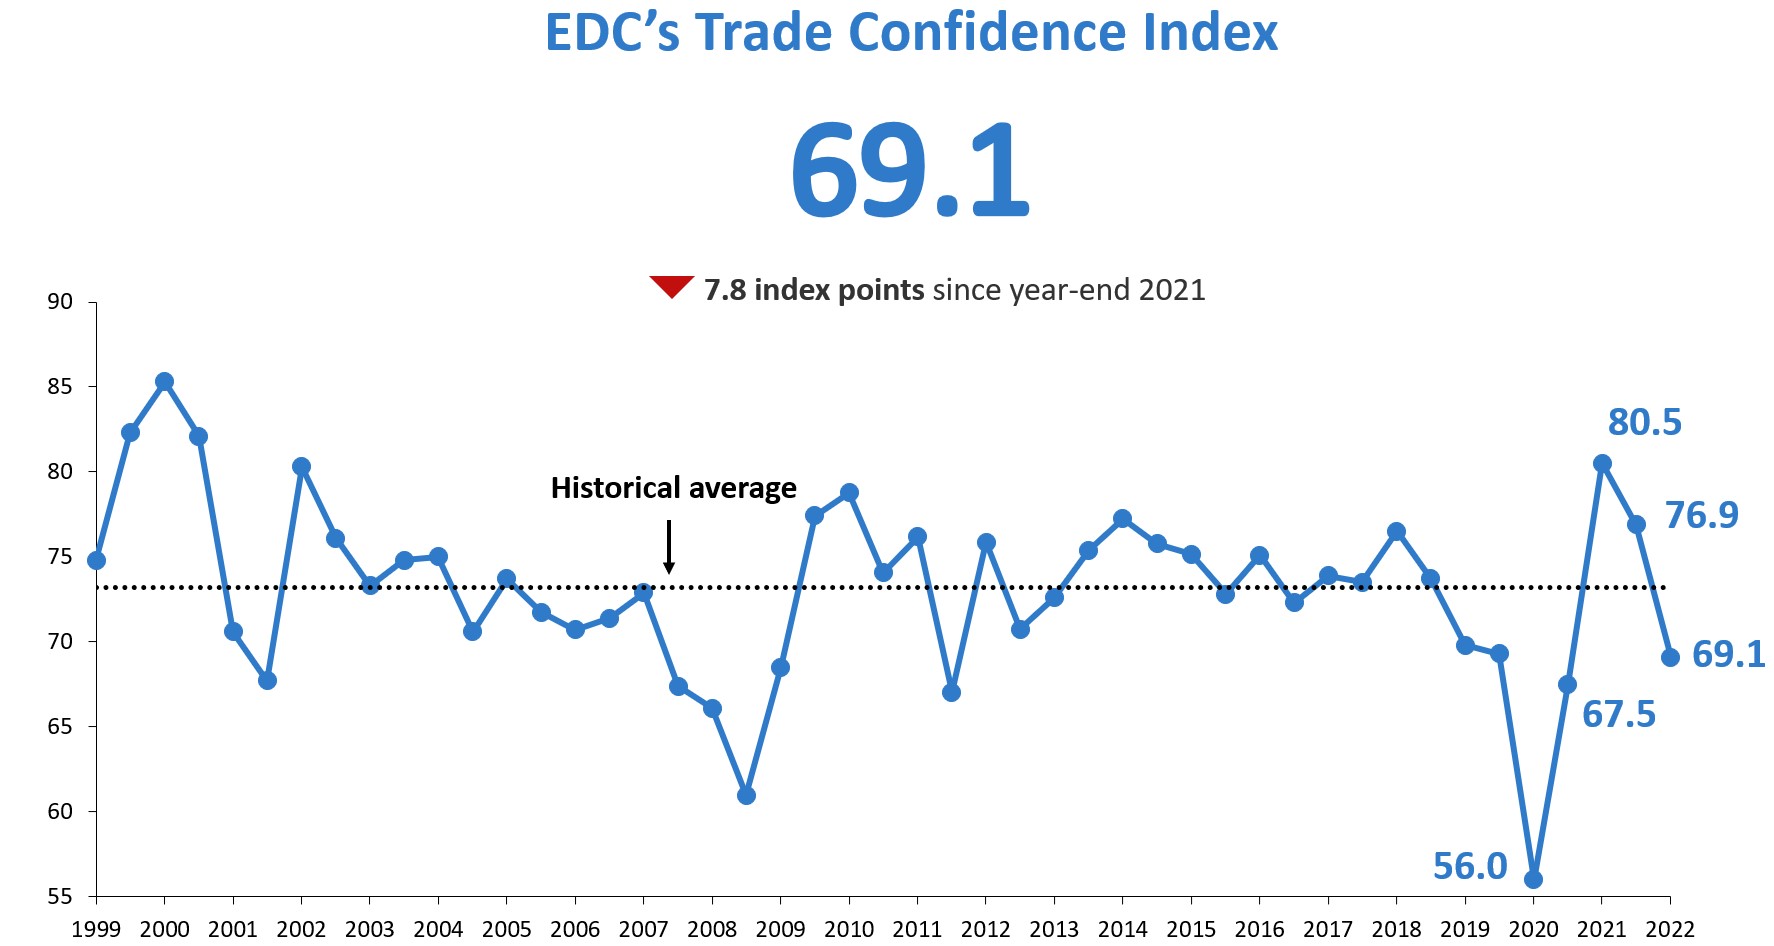 Trade confidence is at 69.1